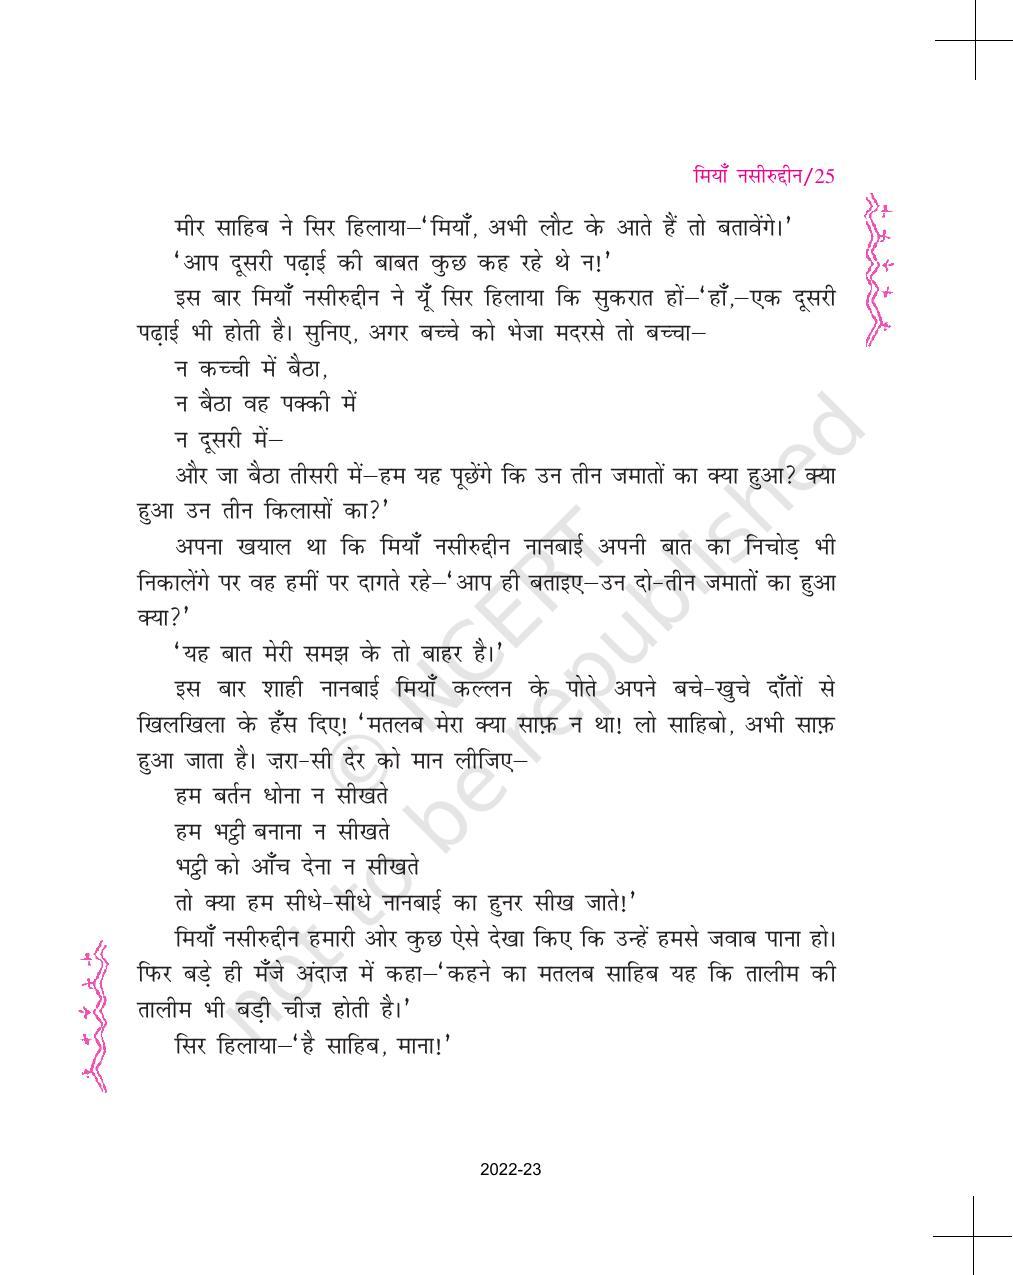 NCERT Book for Class 11 Hindi Aroh Chapter 2 मियाँ नसीरुद्दीन - Page 6